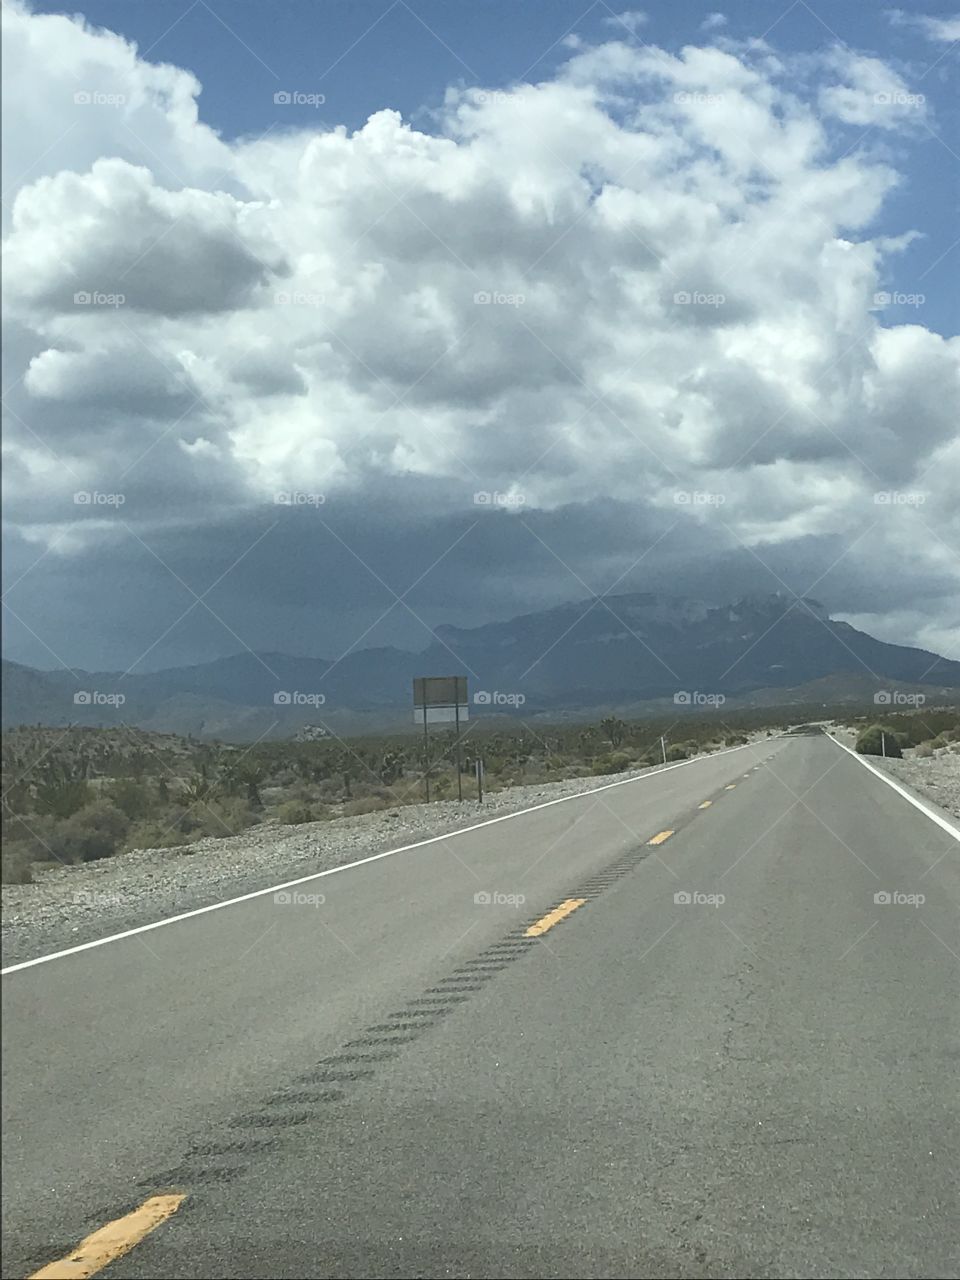 Stormy drive to the mountains 